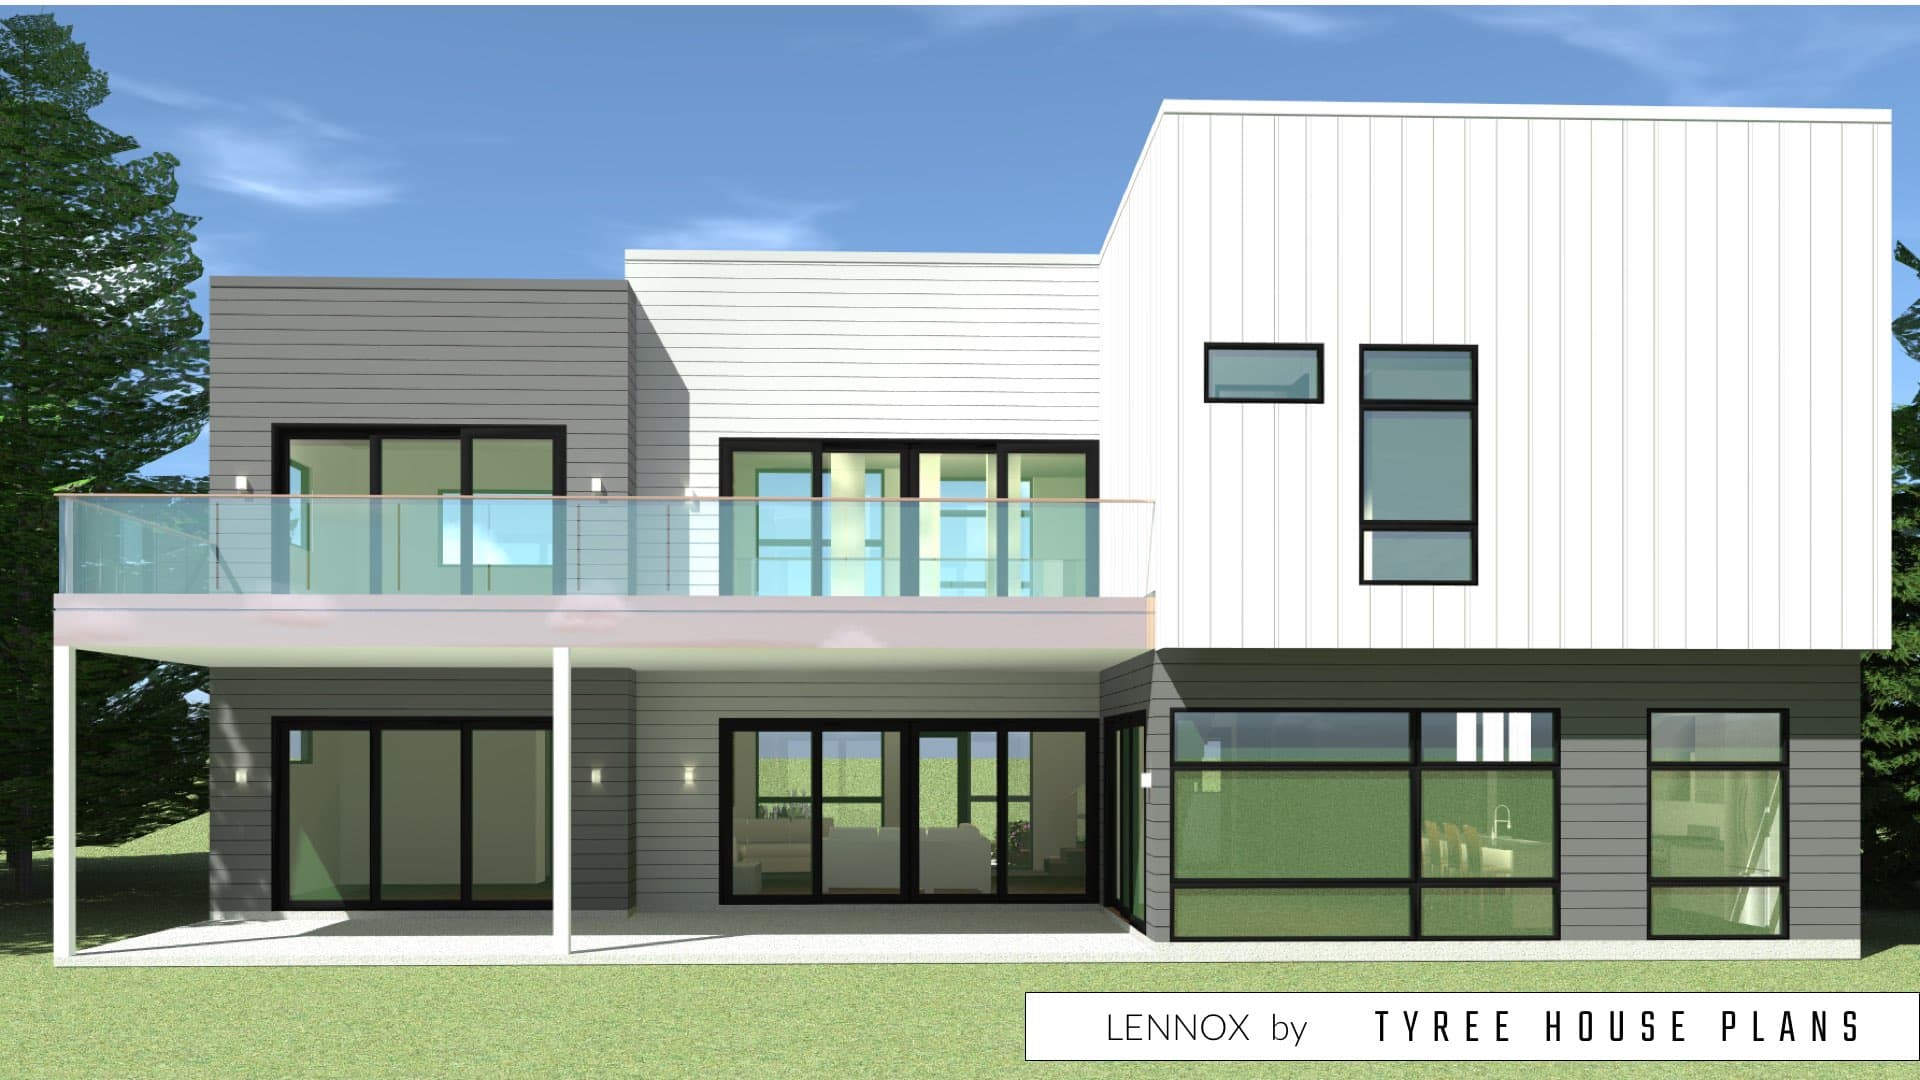 Rear view. Lennox by Tyree House Plans